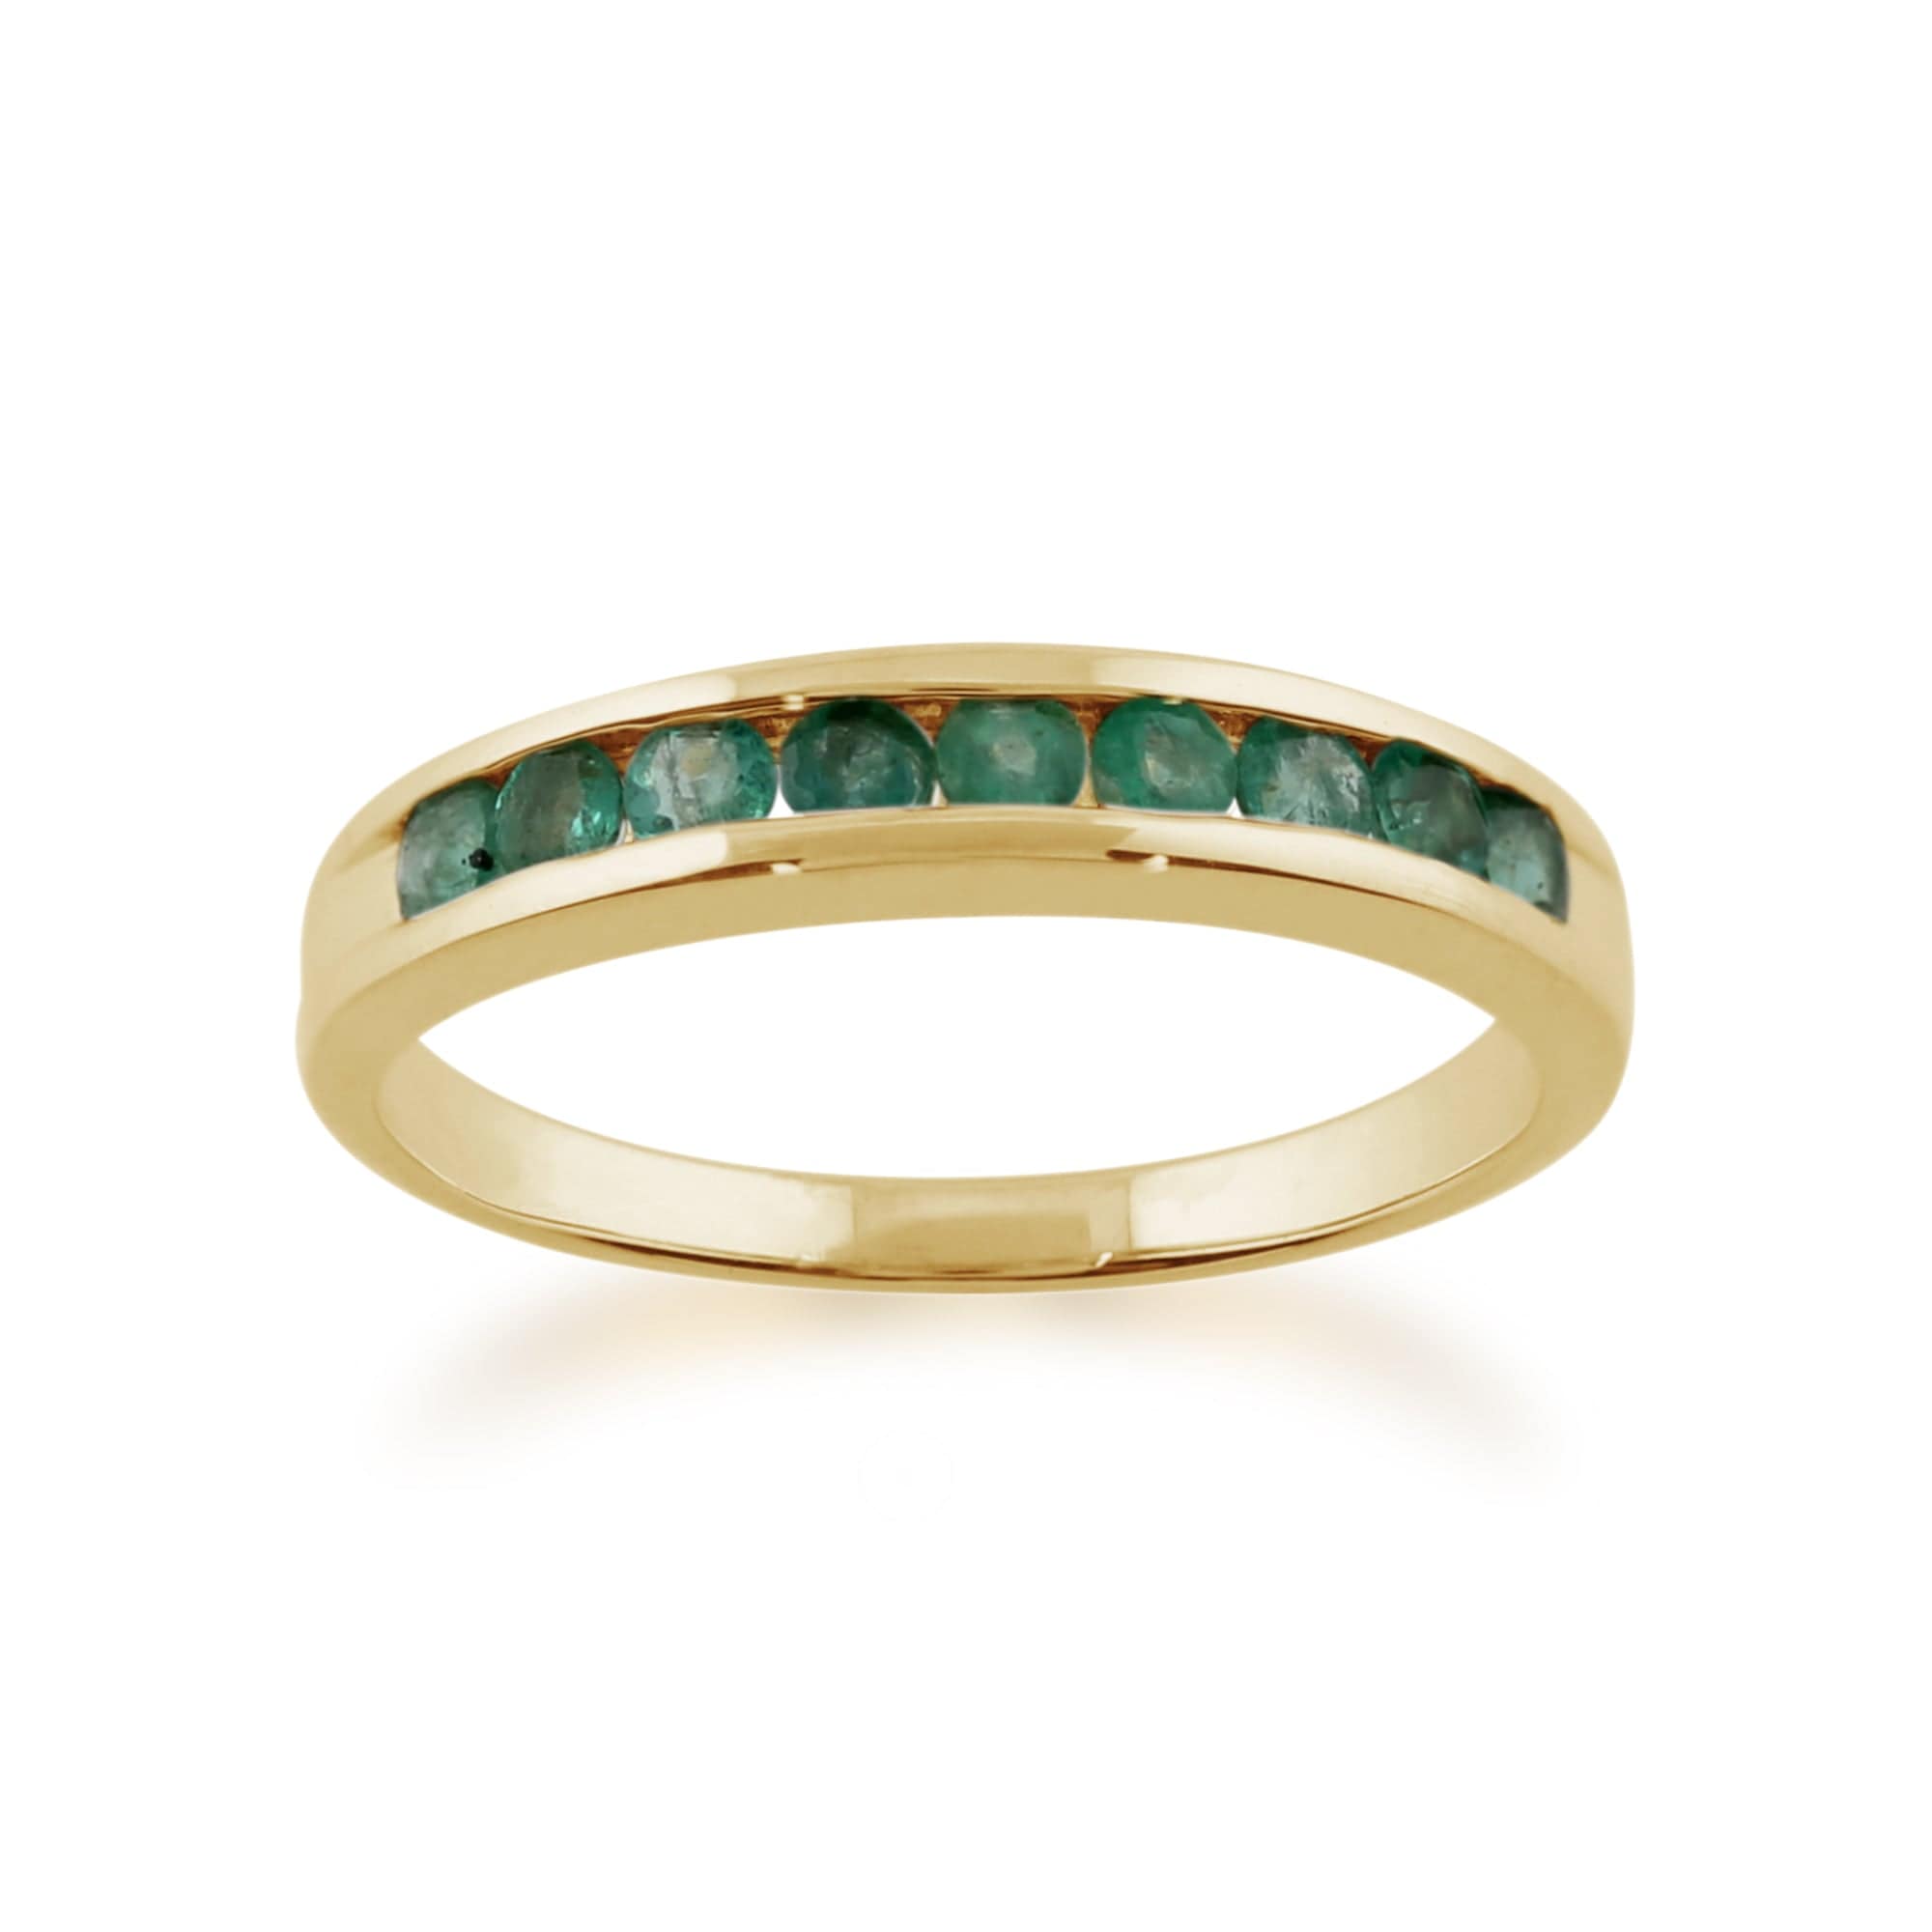 Channel Set 0.44ct Round Emerald Ring in 9ct Yellow Gold 108R2496149 